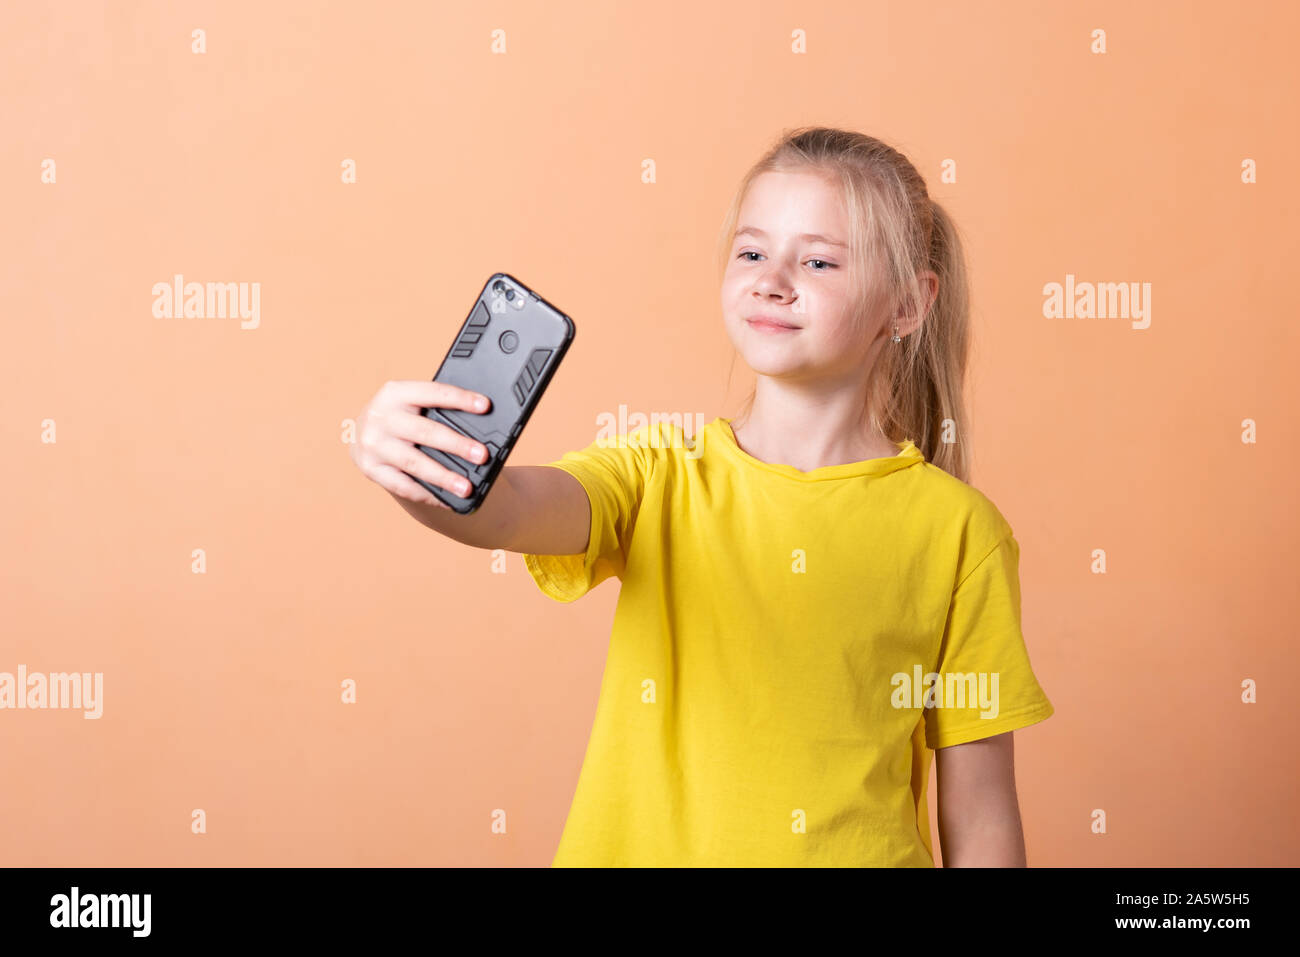 Little girl takes a selfie, on a light orange background. Stock Photo